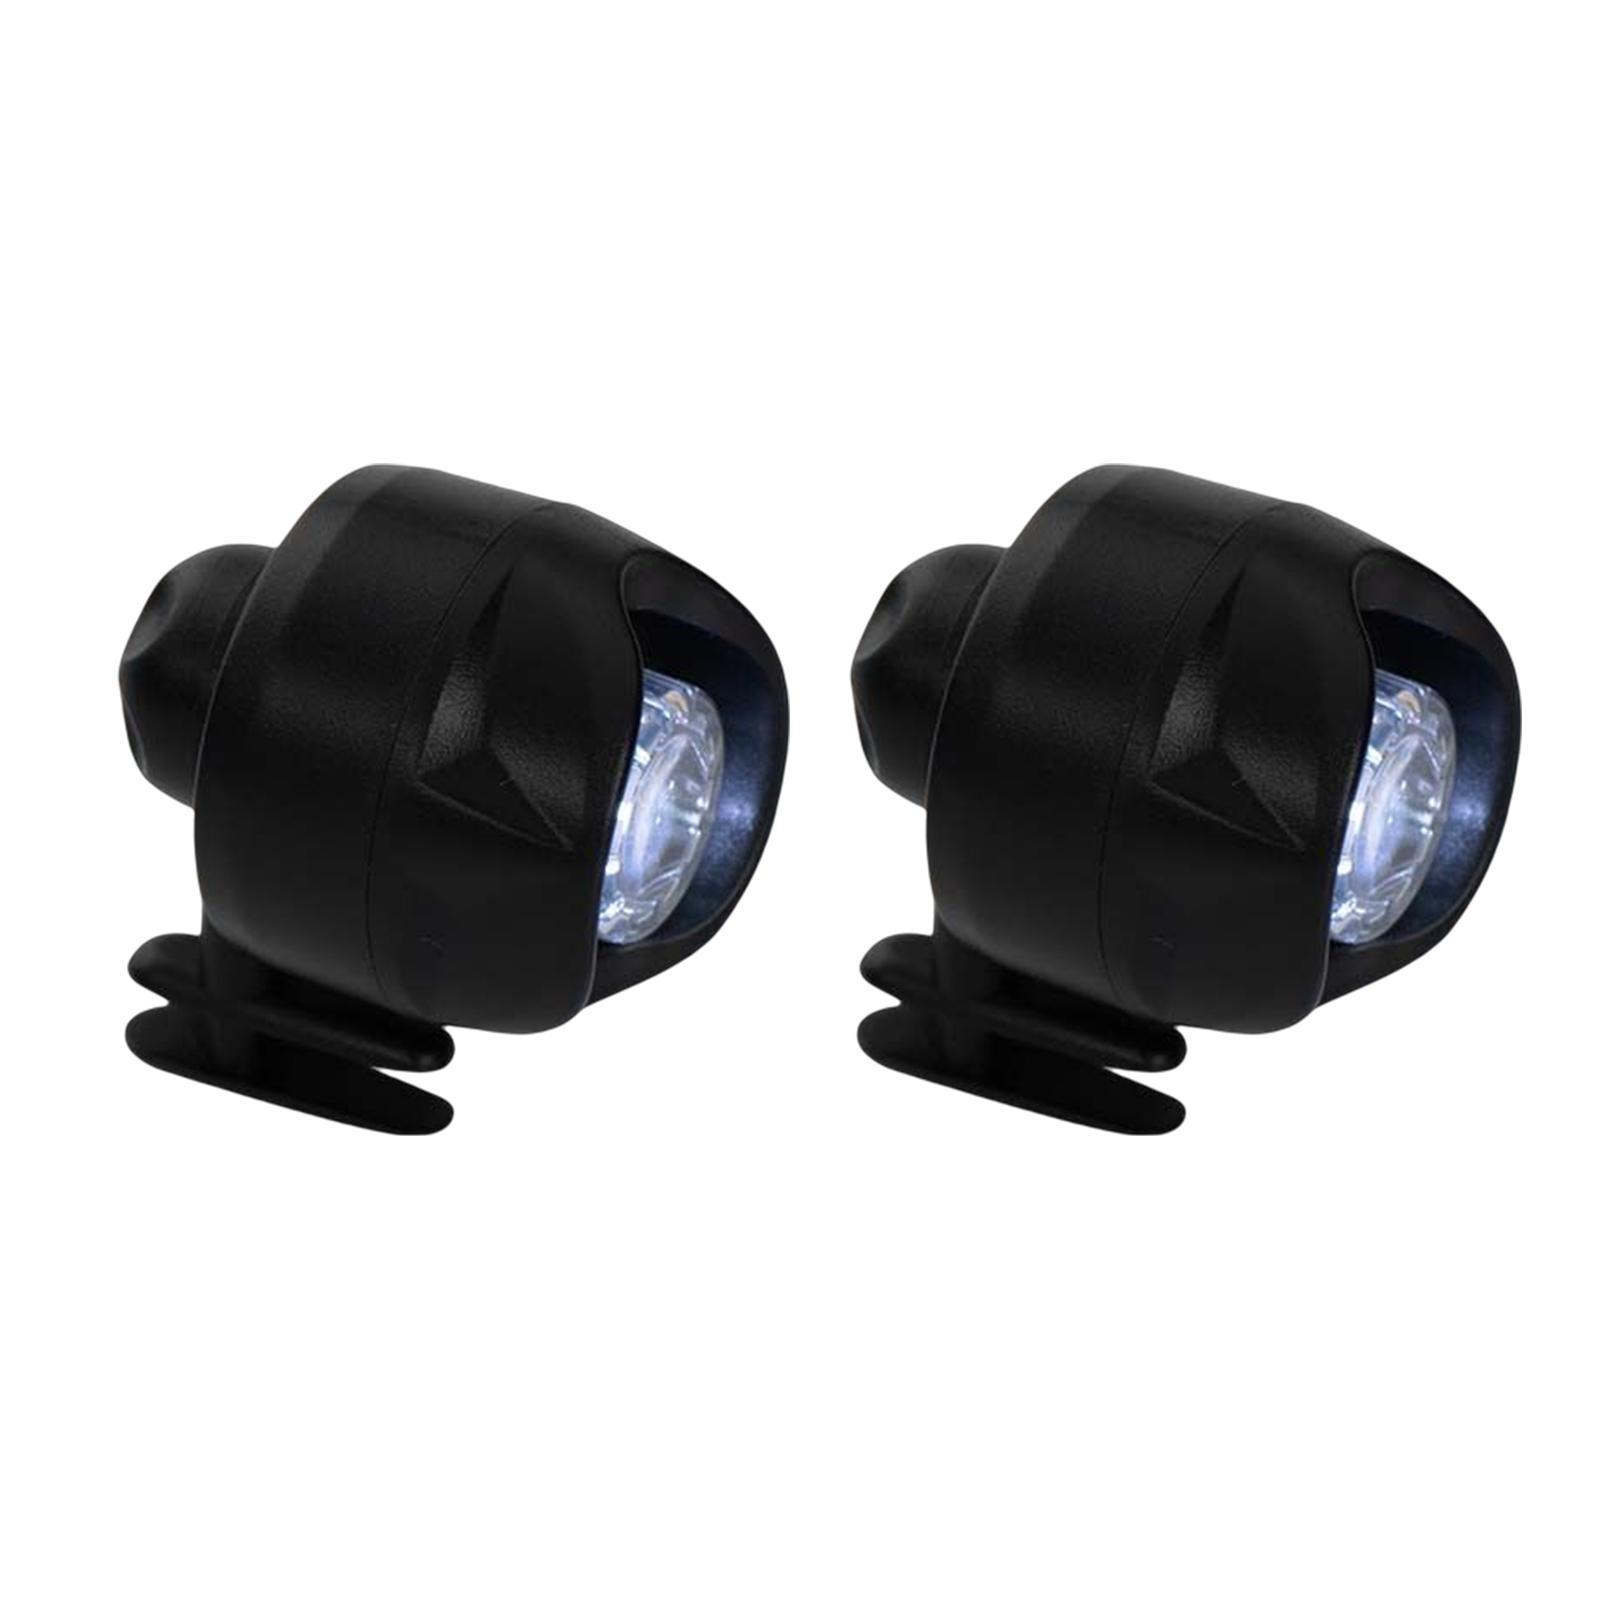 Holey Shoes Headlights with 3 Light Modes for Camping Lighting Accessories